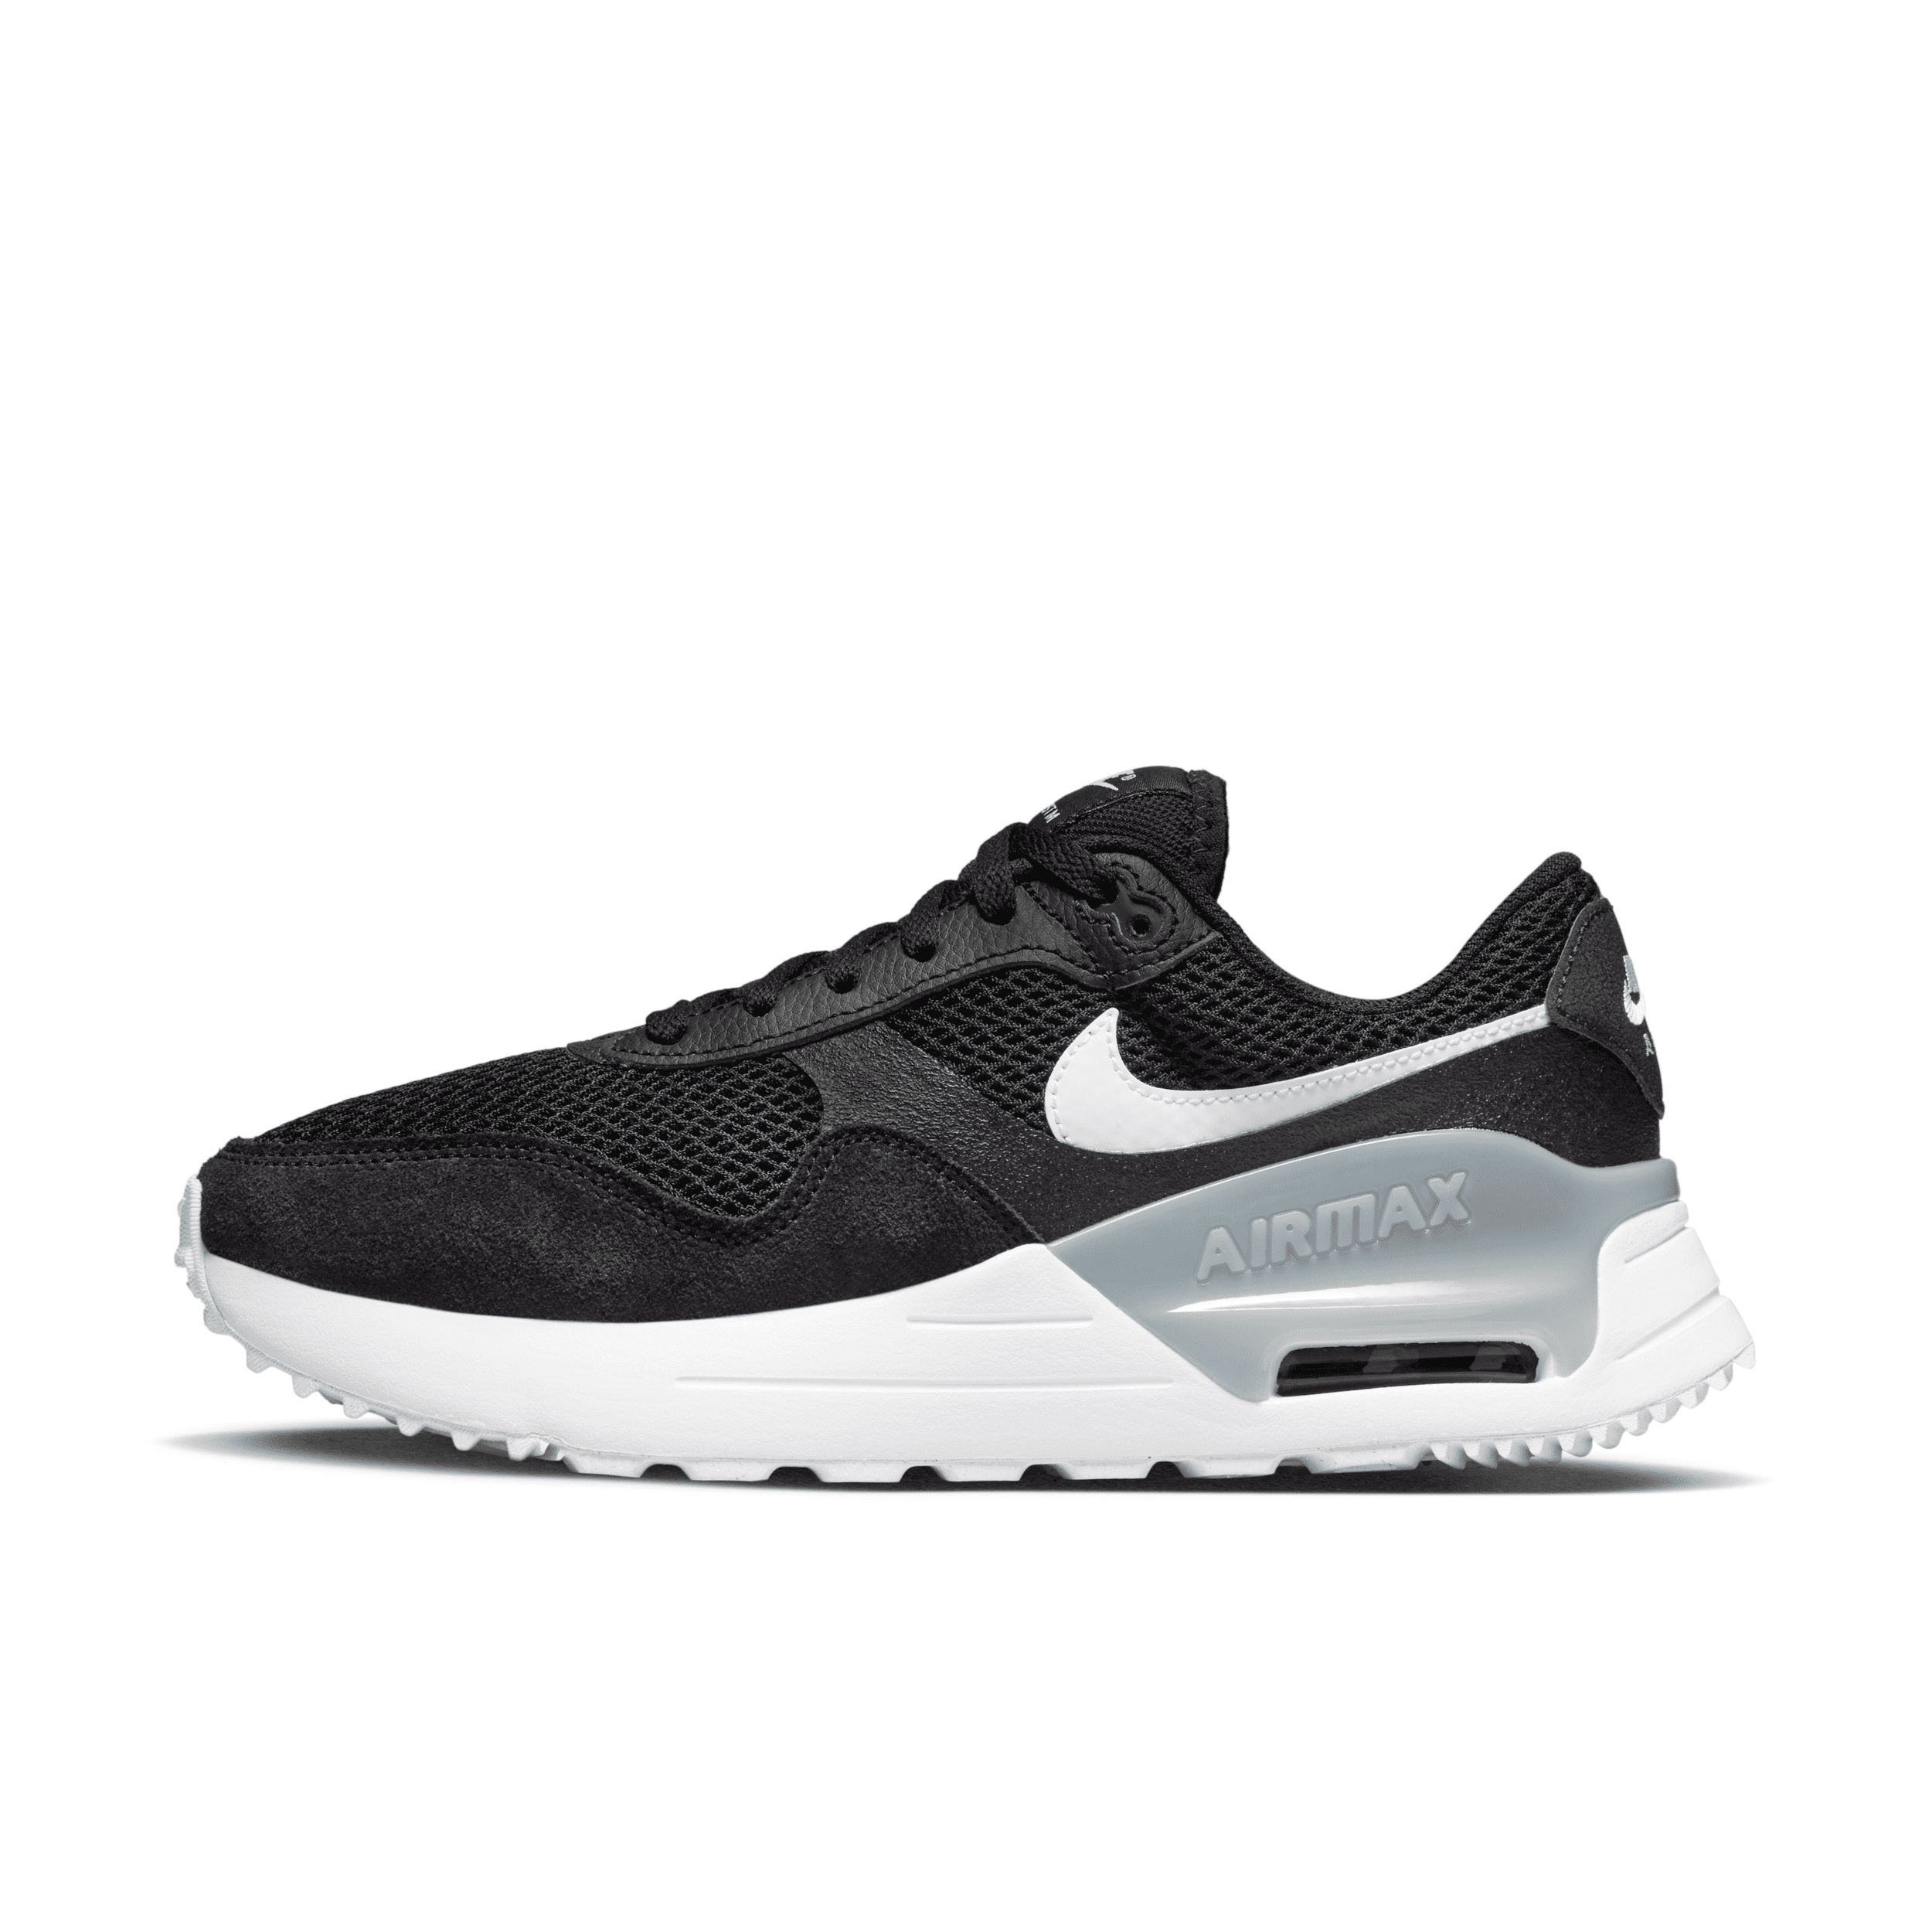 Nike Women's Air Max SYSTM Shoes in Black, Size: 6 | DM9538-001 | Nike (US)